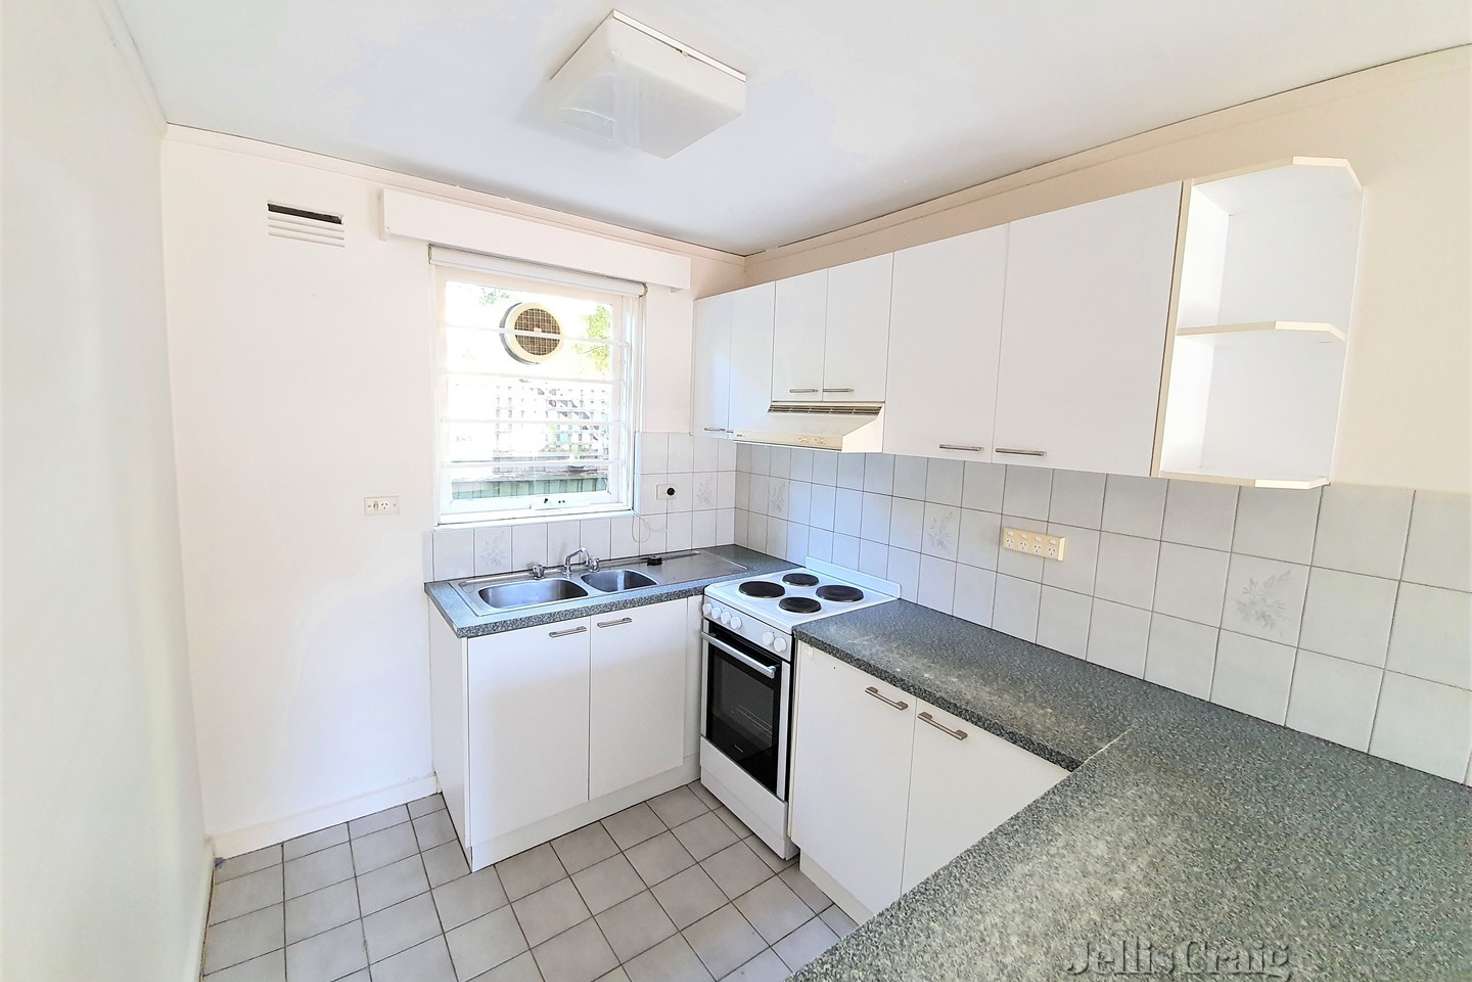 Main view of Homely apartment listing, 5/31 Woolton Avenue, Thornbury VIC 3071